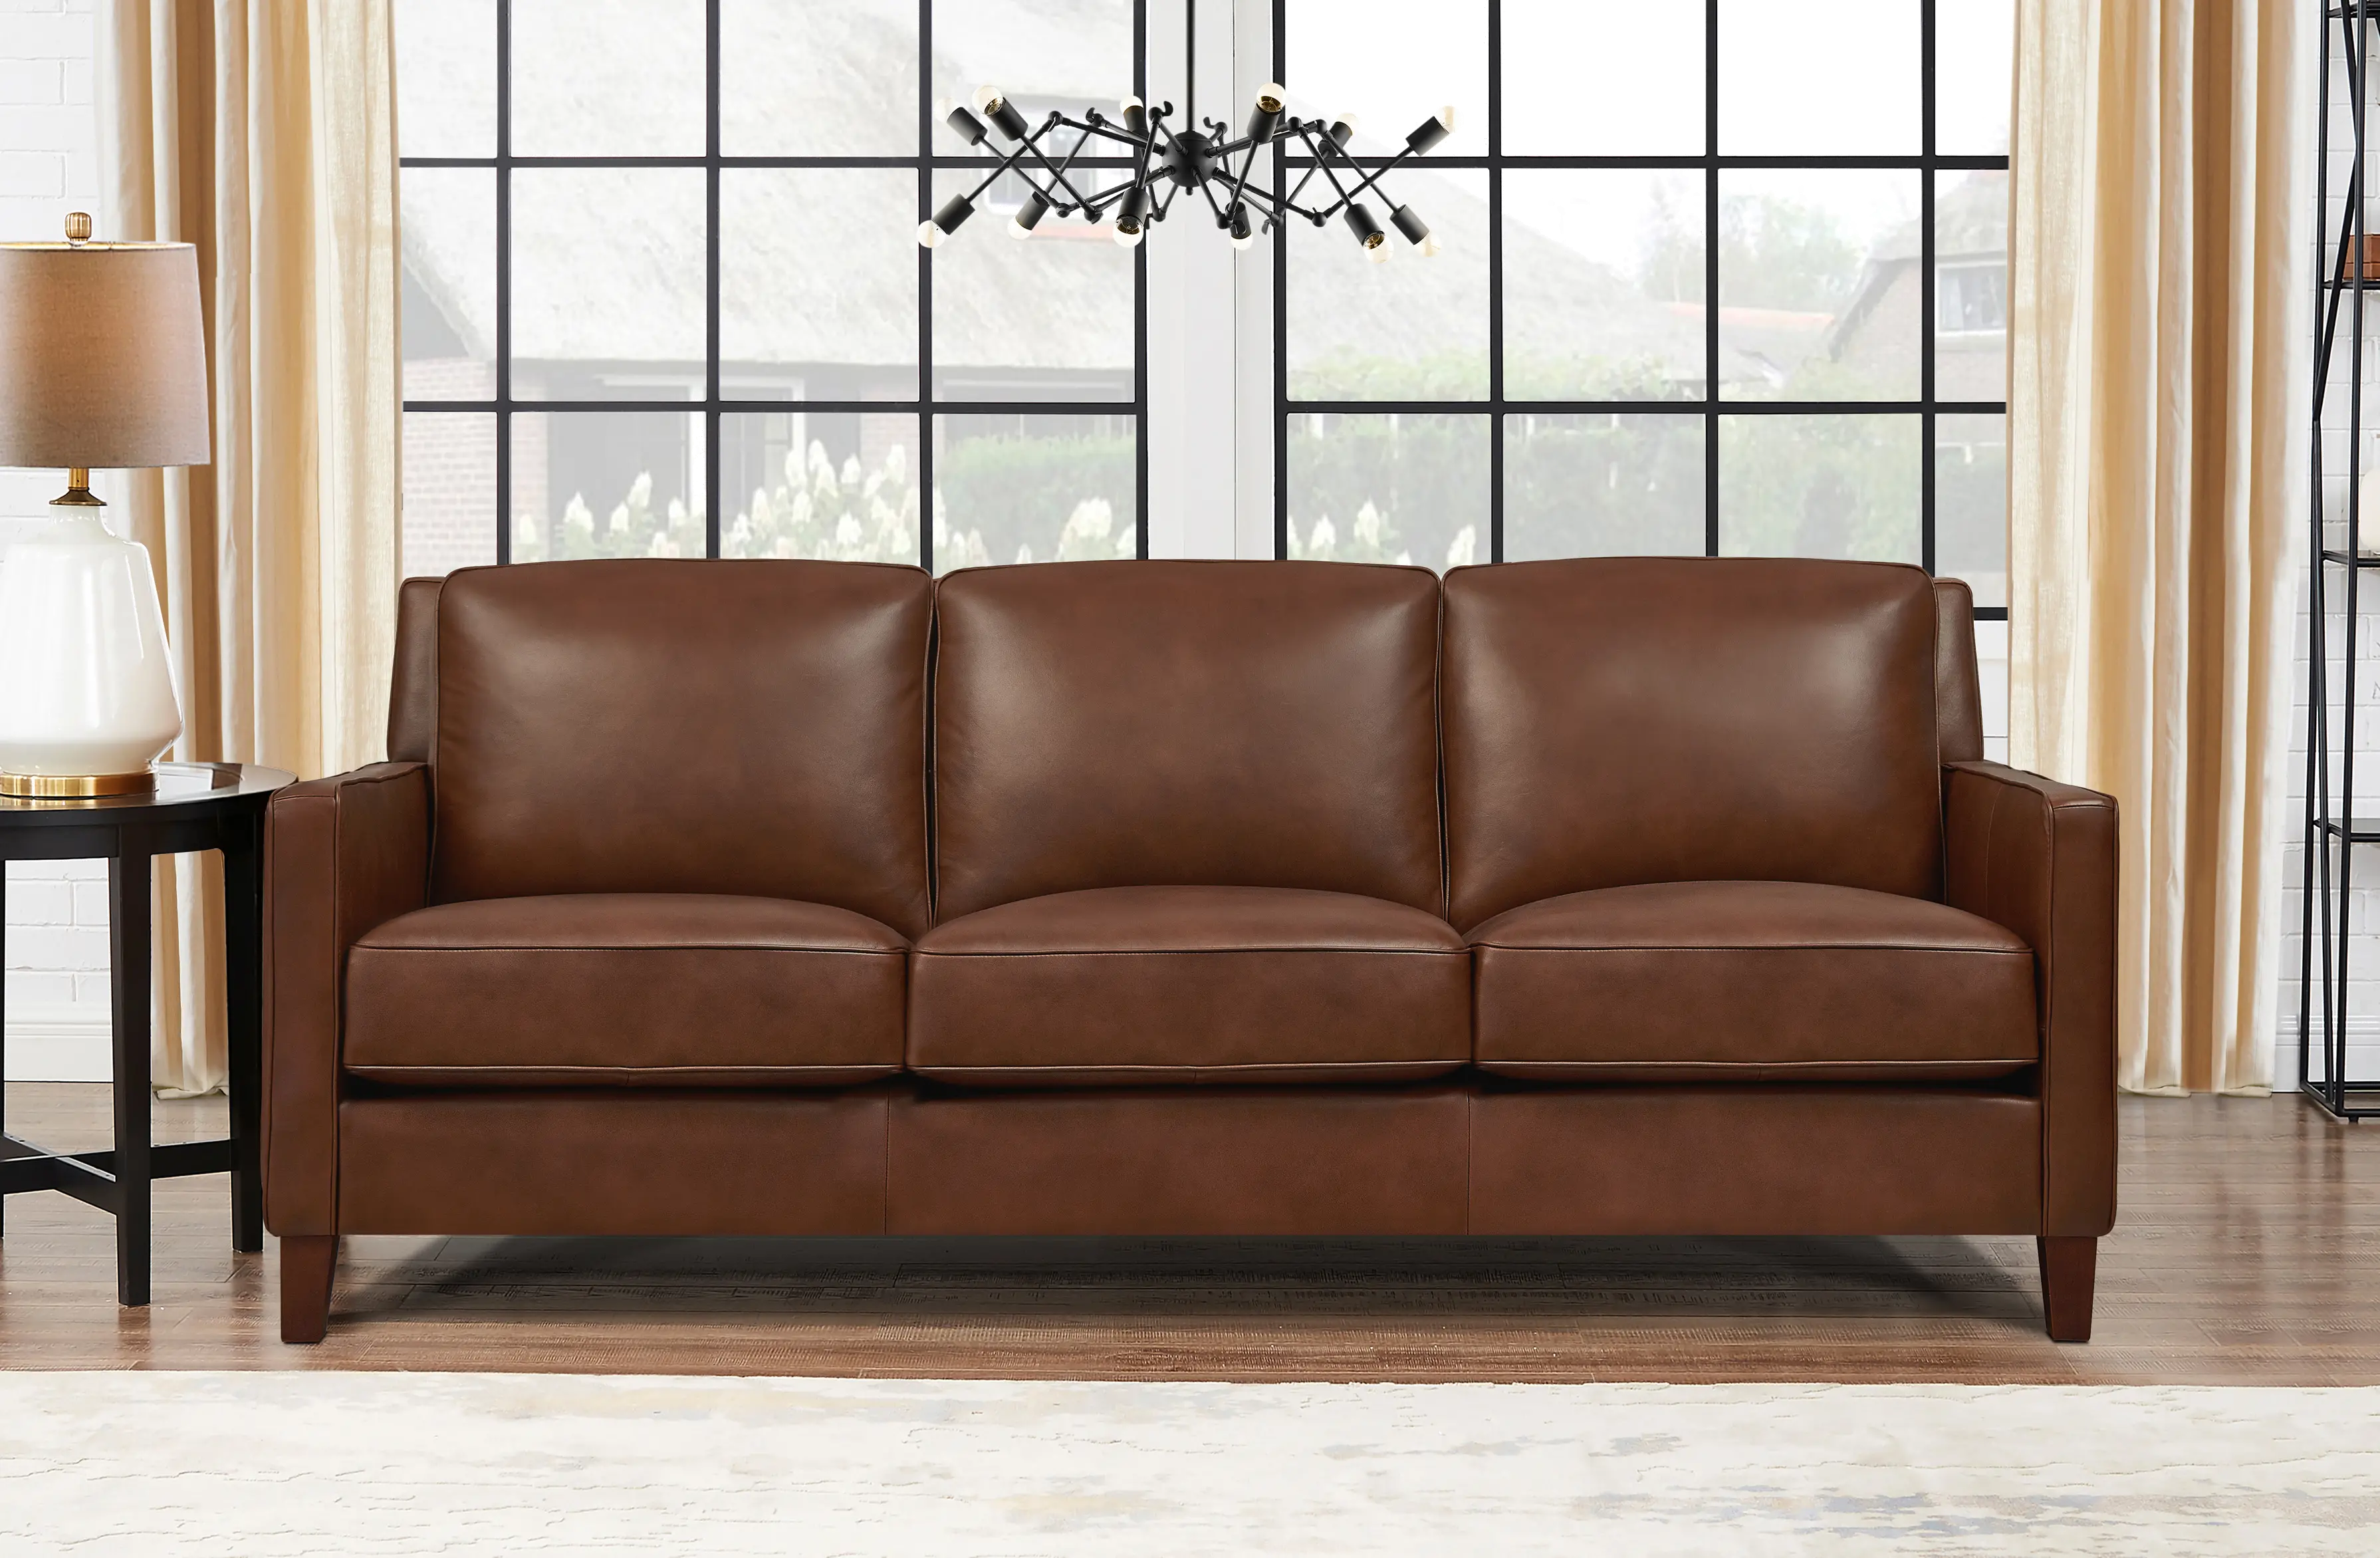 6571-30-1566H New Haven Brown Leather Sofa - Amax Leather sku 6571-30-1566H